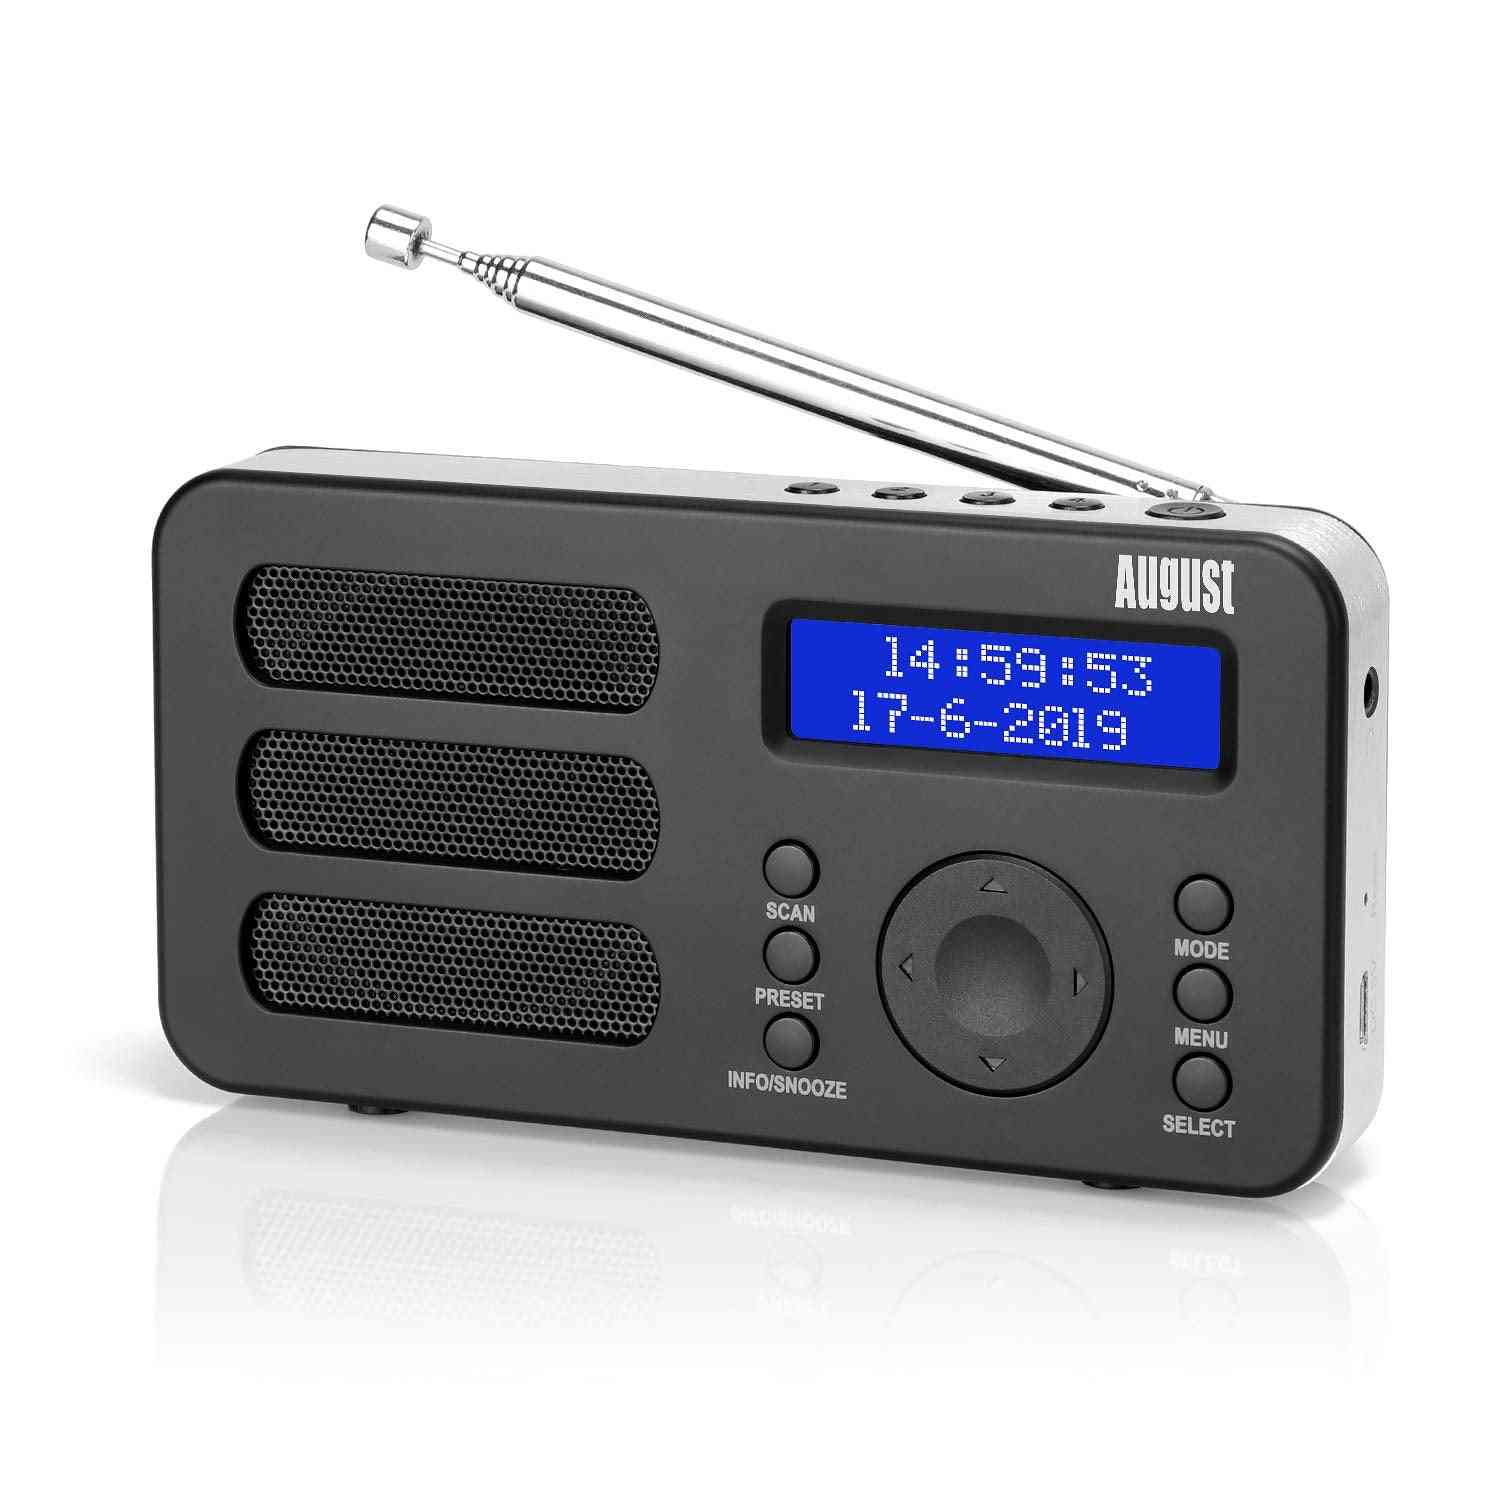 Portable Digital Radio Mb225, Dab, Dab+ Fm Rds Function With Dual Alarm Stereo,mono Speaker Rechargeable Battery With Lcd (mb225)